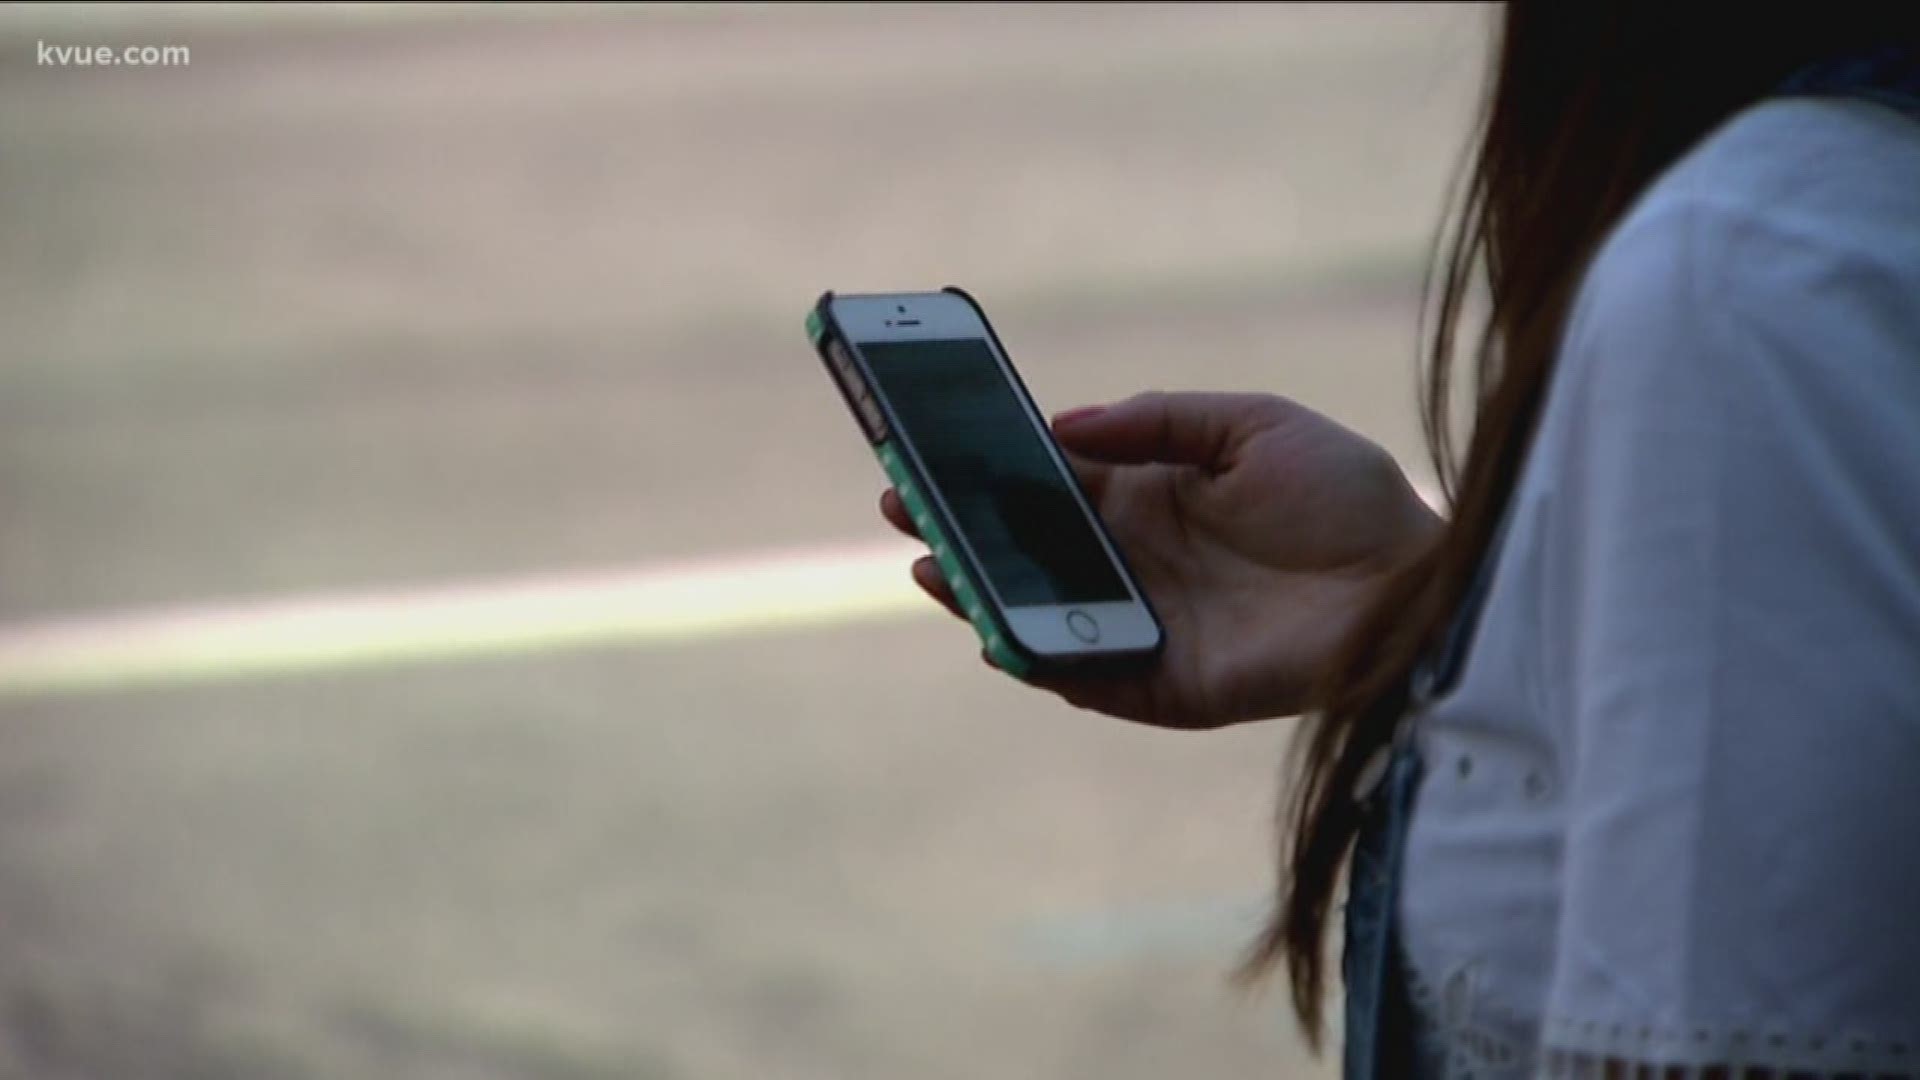 Hundreds of new state laws take effect Sept. 1. One of them makes it illegal to send nude photos you don't ask for.